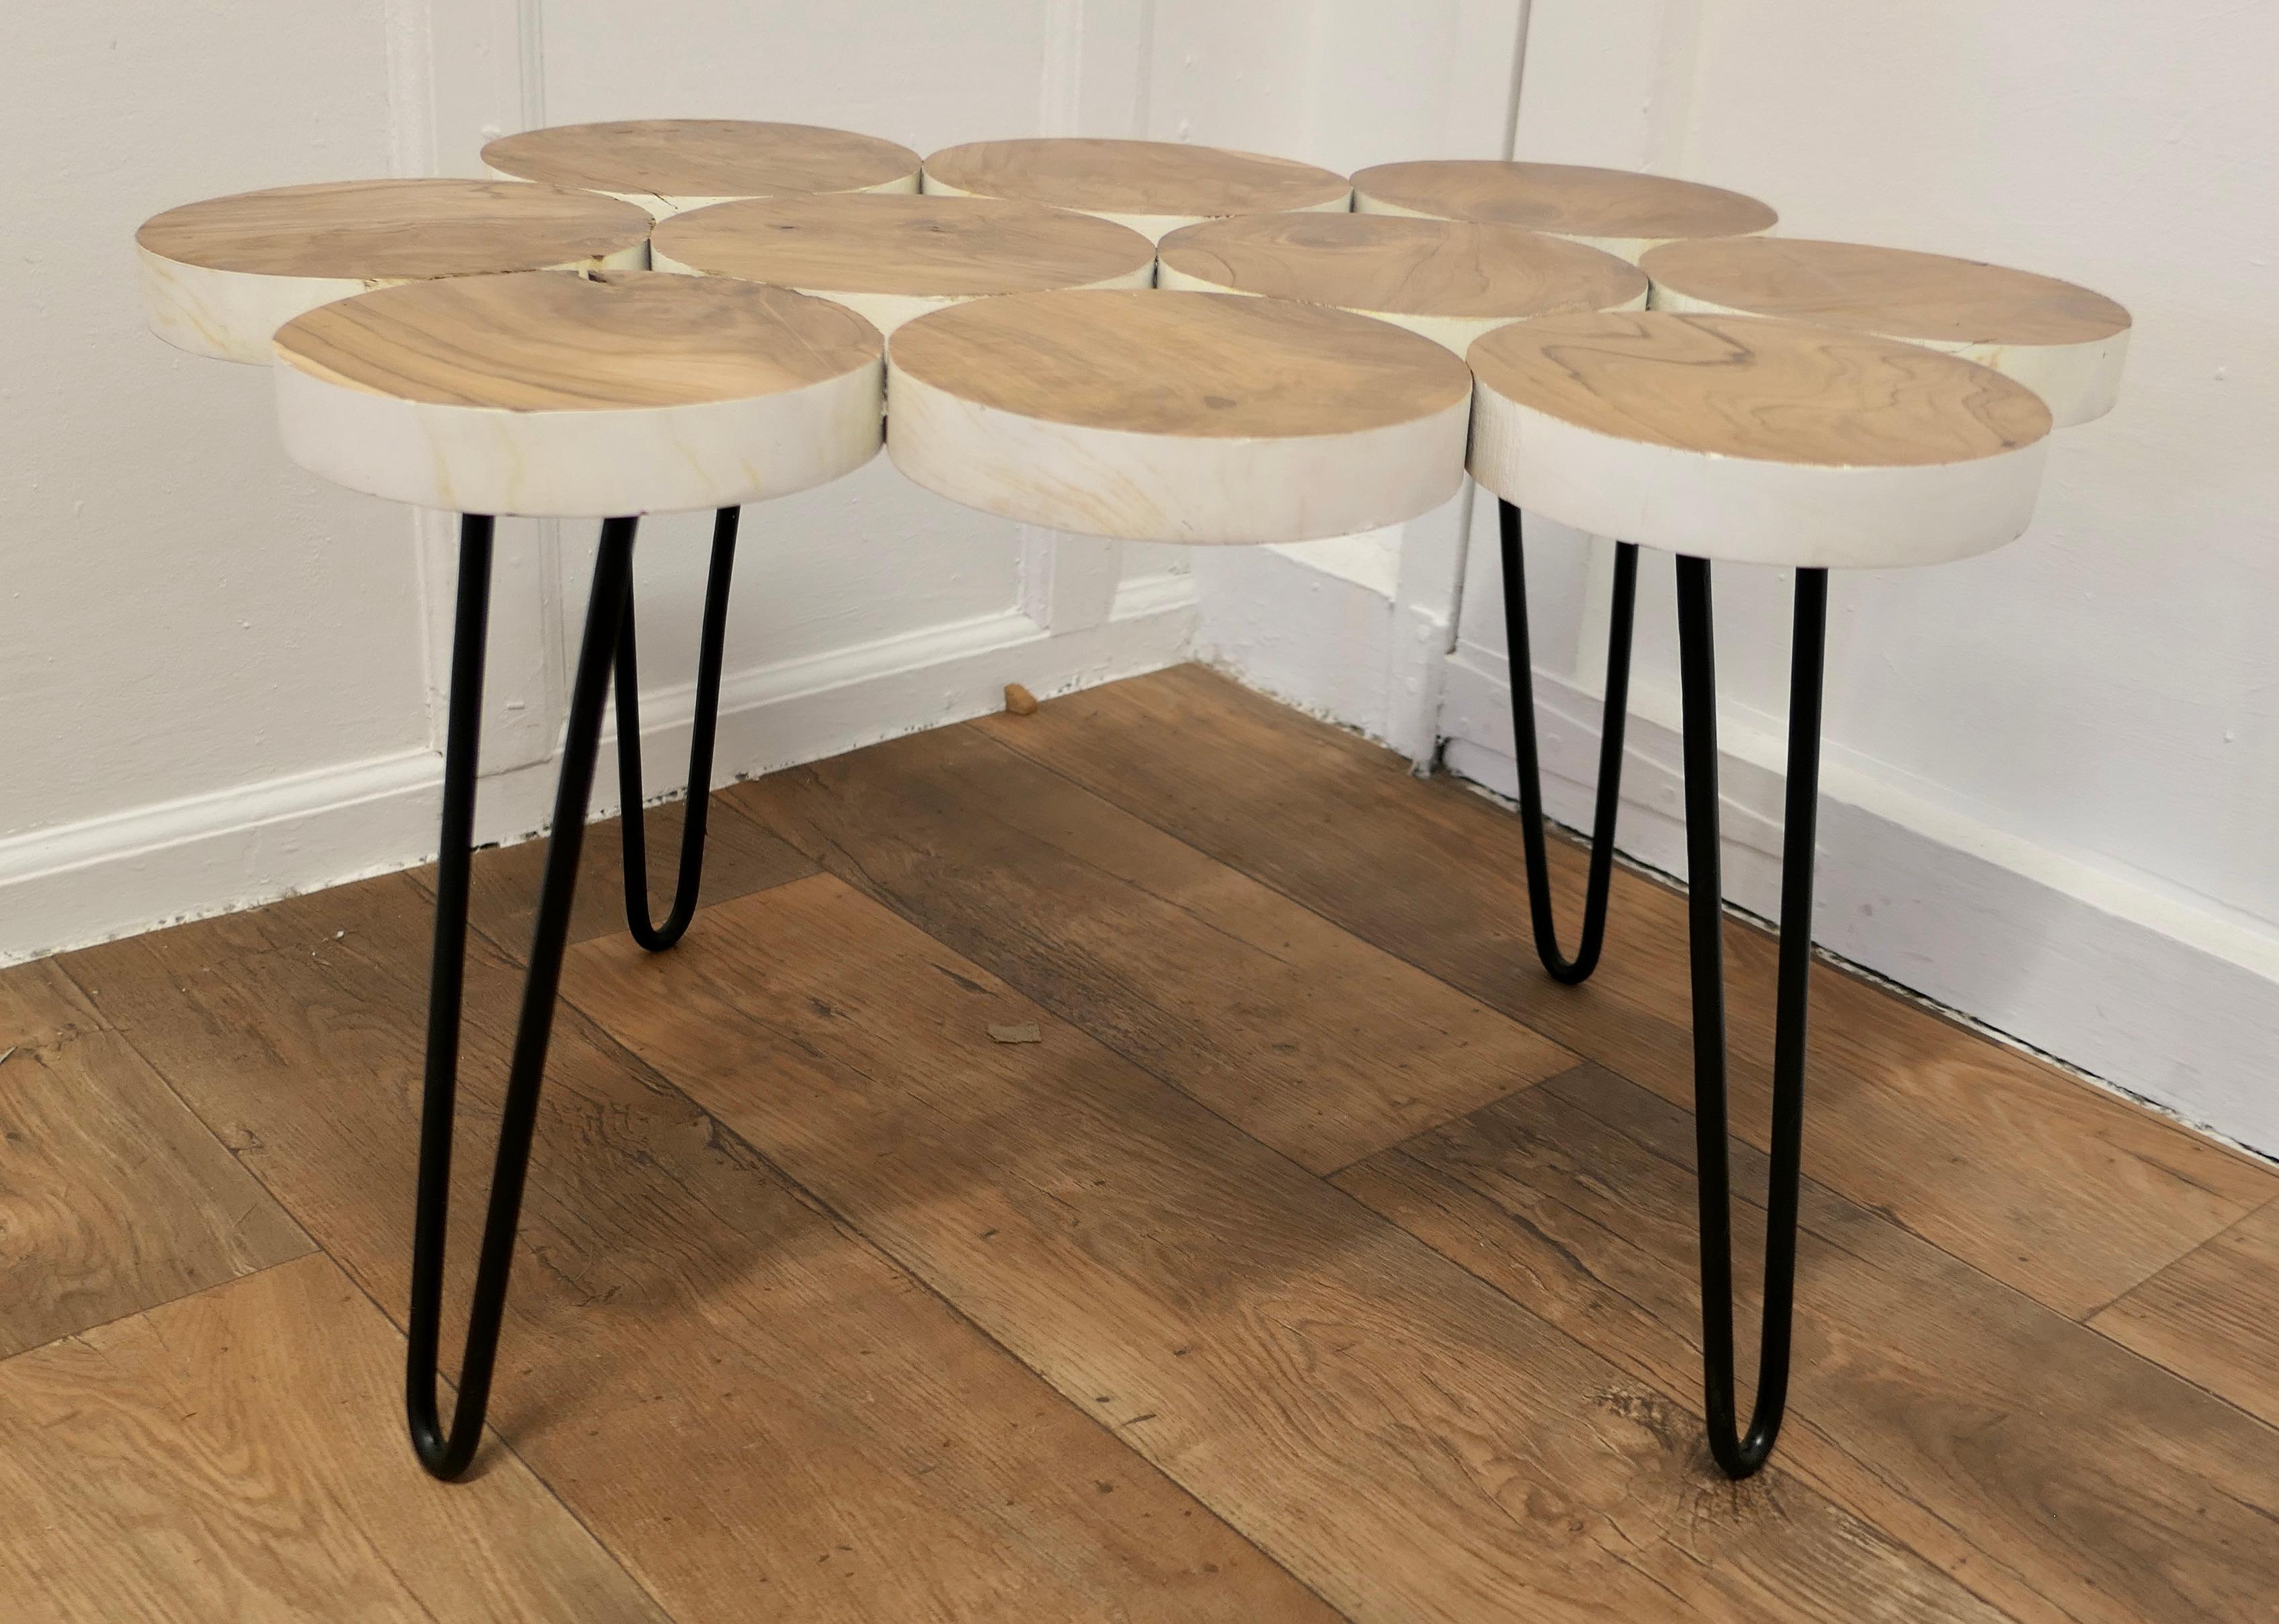 Wonderful midcentury Folk Art Olive Wood Table

The table top is made from slices of Olive wood which are screws together and set on black wire work legs
A charming look to the old wood and making a statement piece Coffee or Cocktail table
The